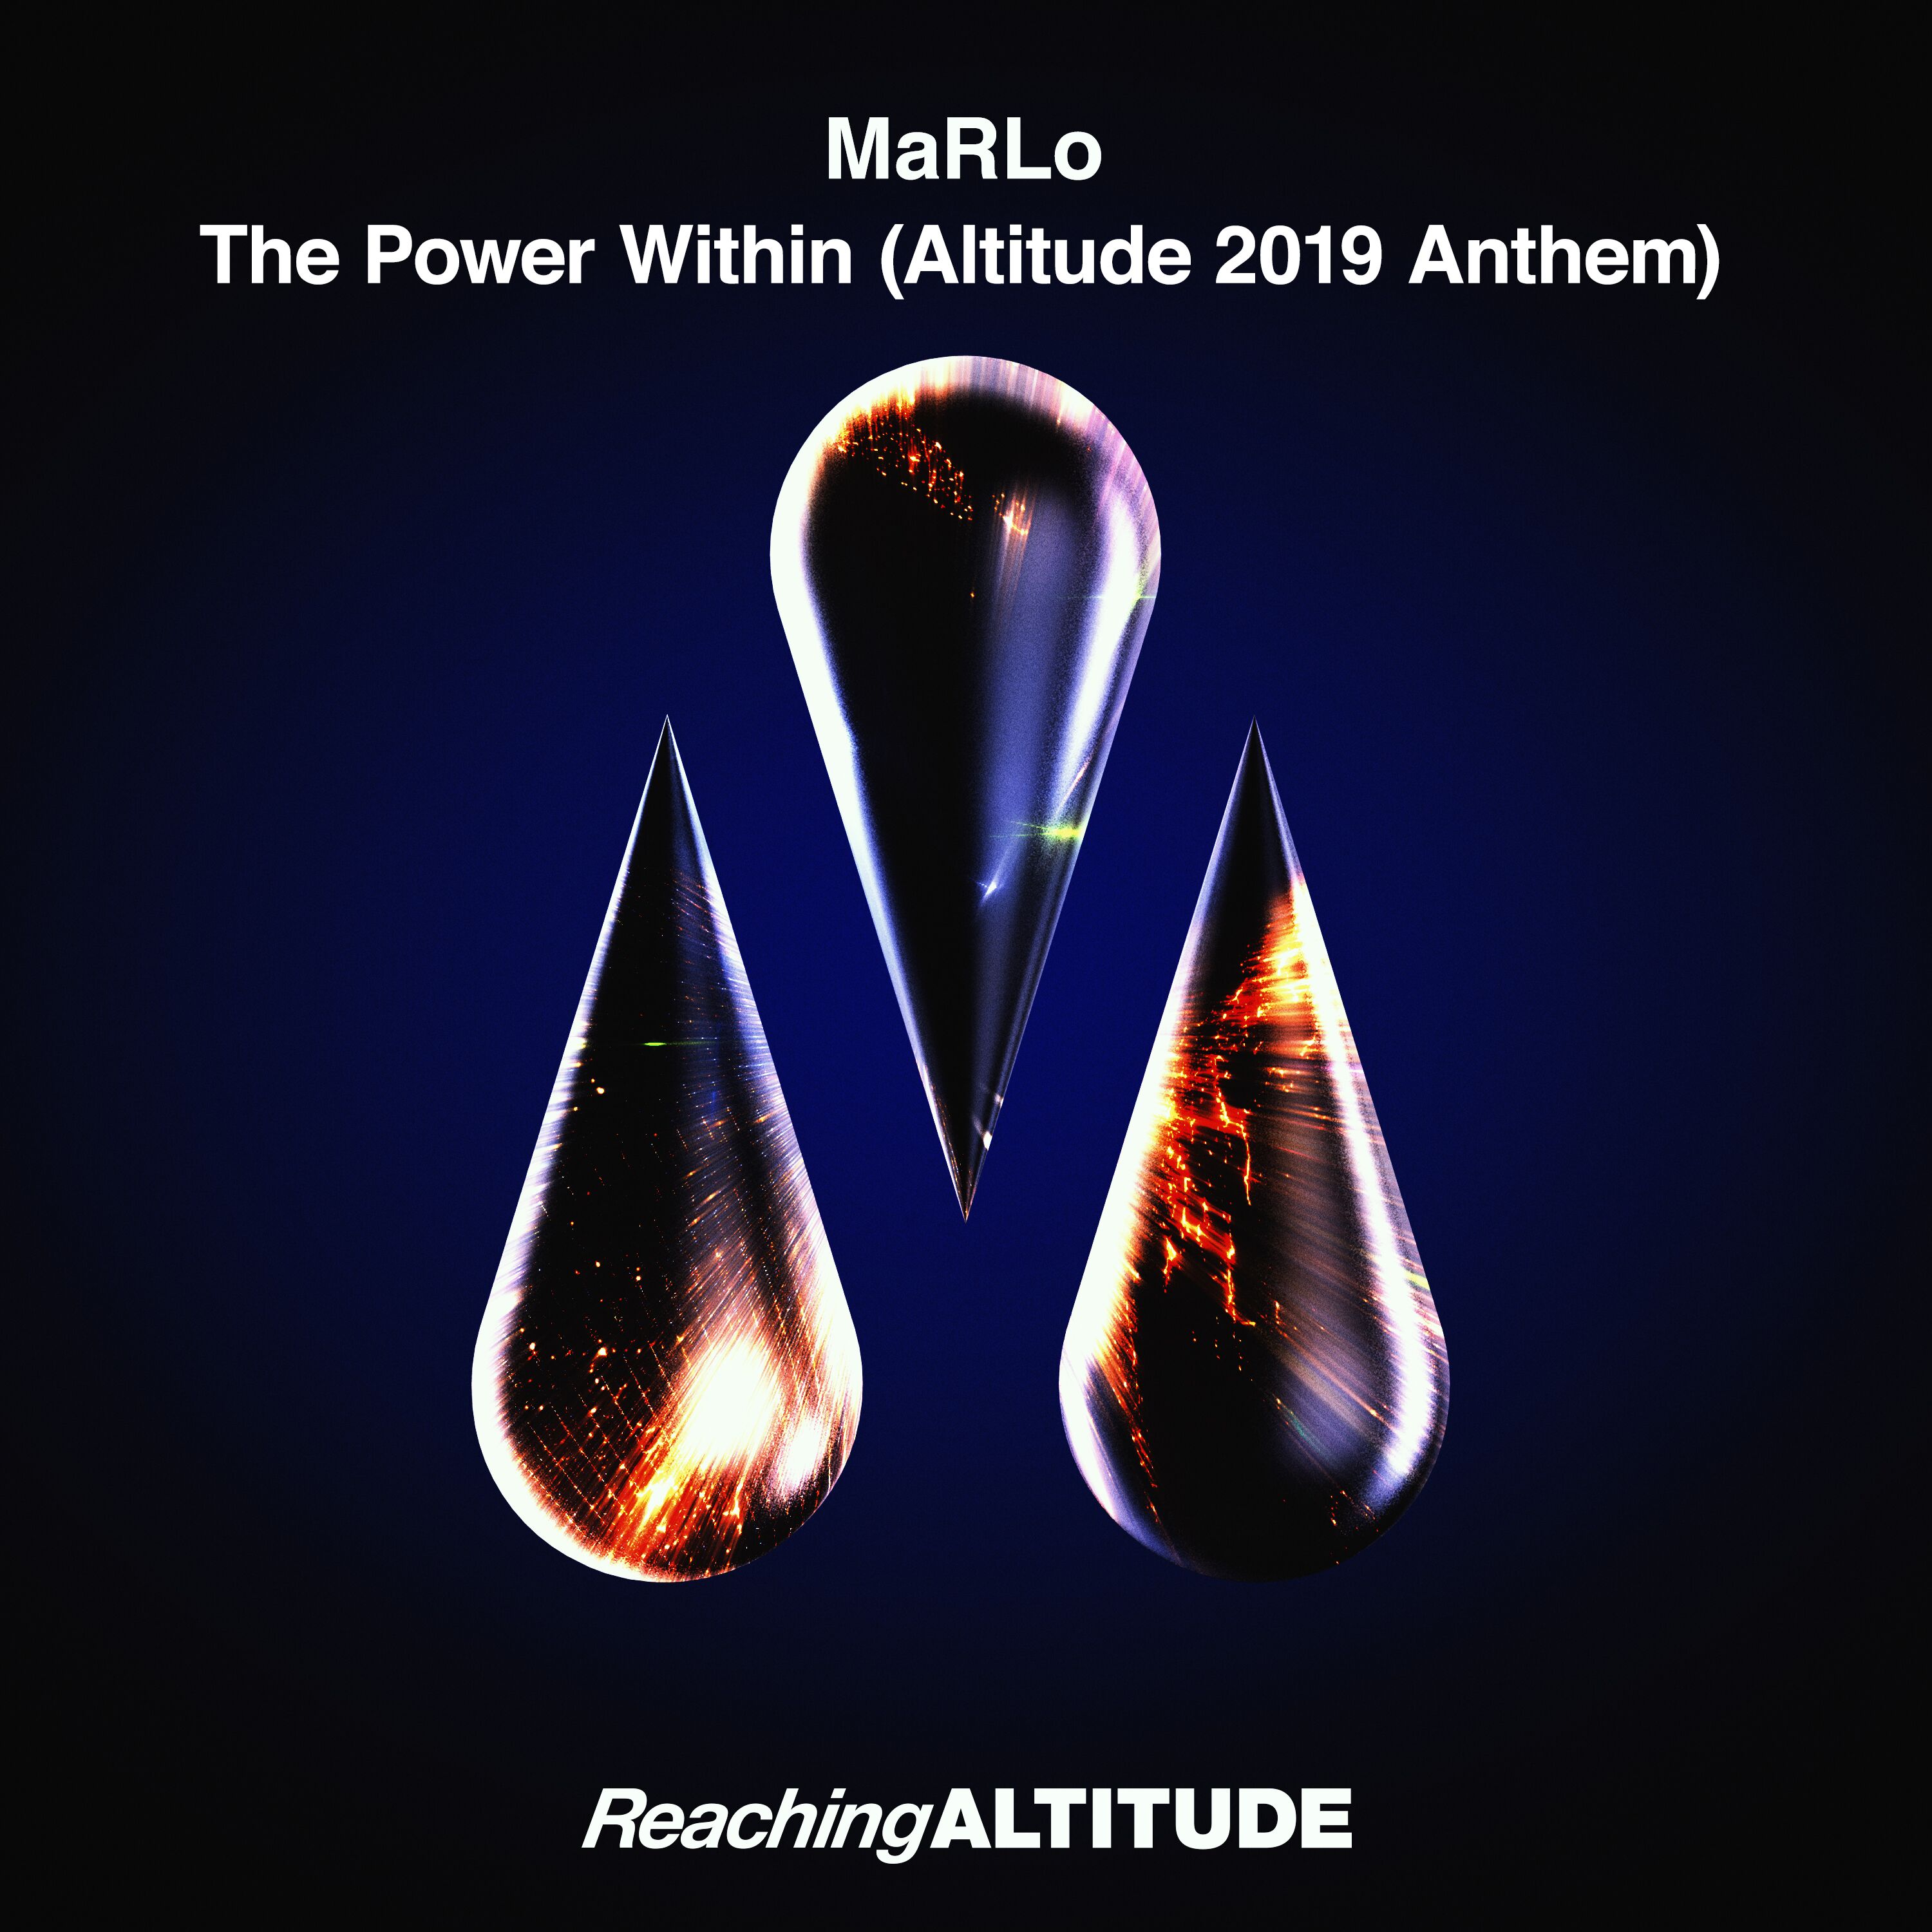 MaRLo - The Power Within (Altitude 2019 Anthem)